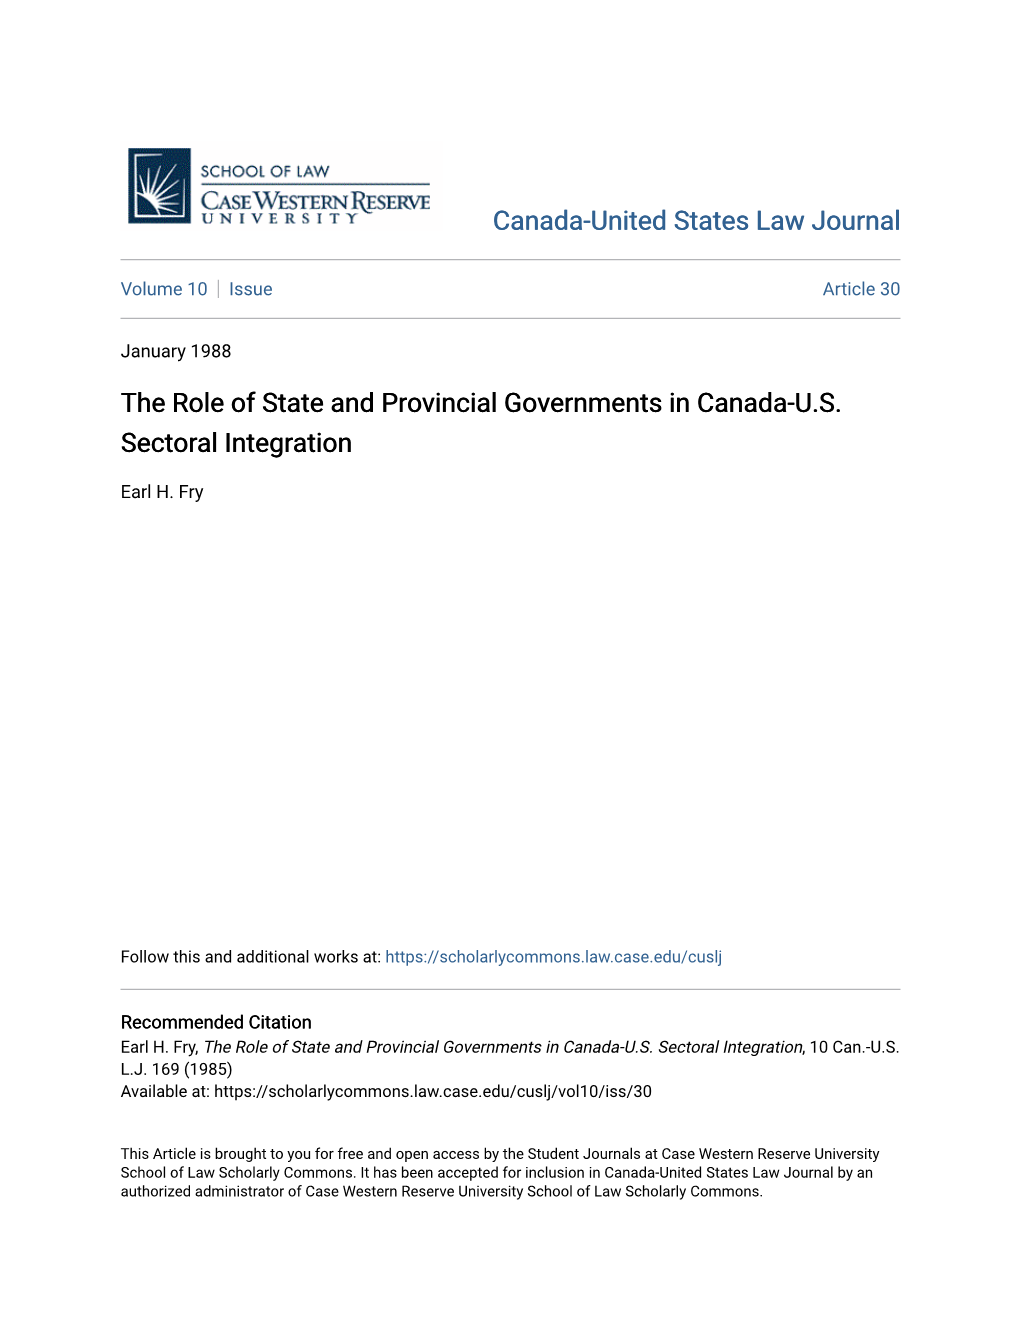 The Role of State and Provincial Governments in Canada-U.S. Sectoral Integration